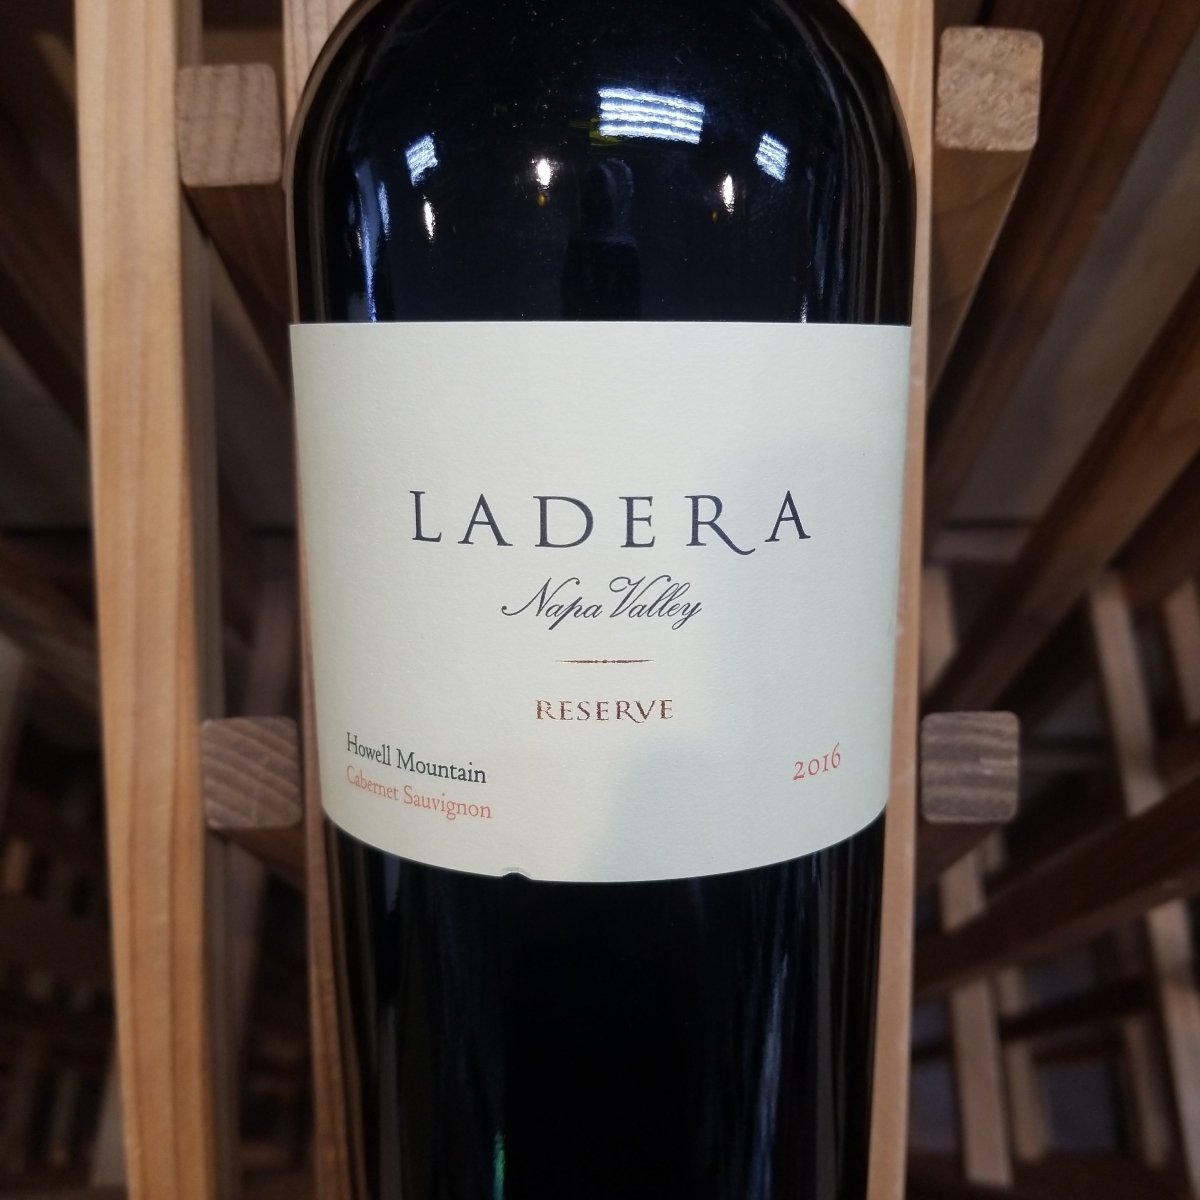 Ladera Howell Mountain Reserve Cabernet Sauvignon 2016, 750ml - Sip & Say